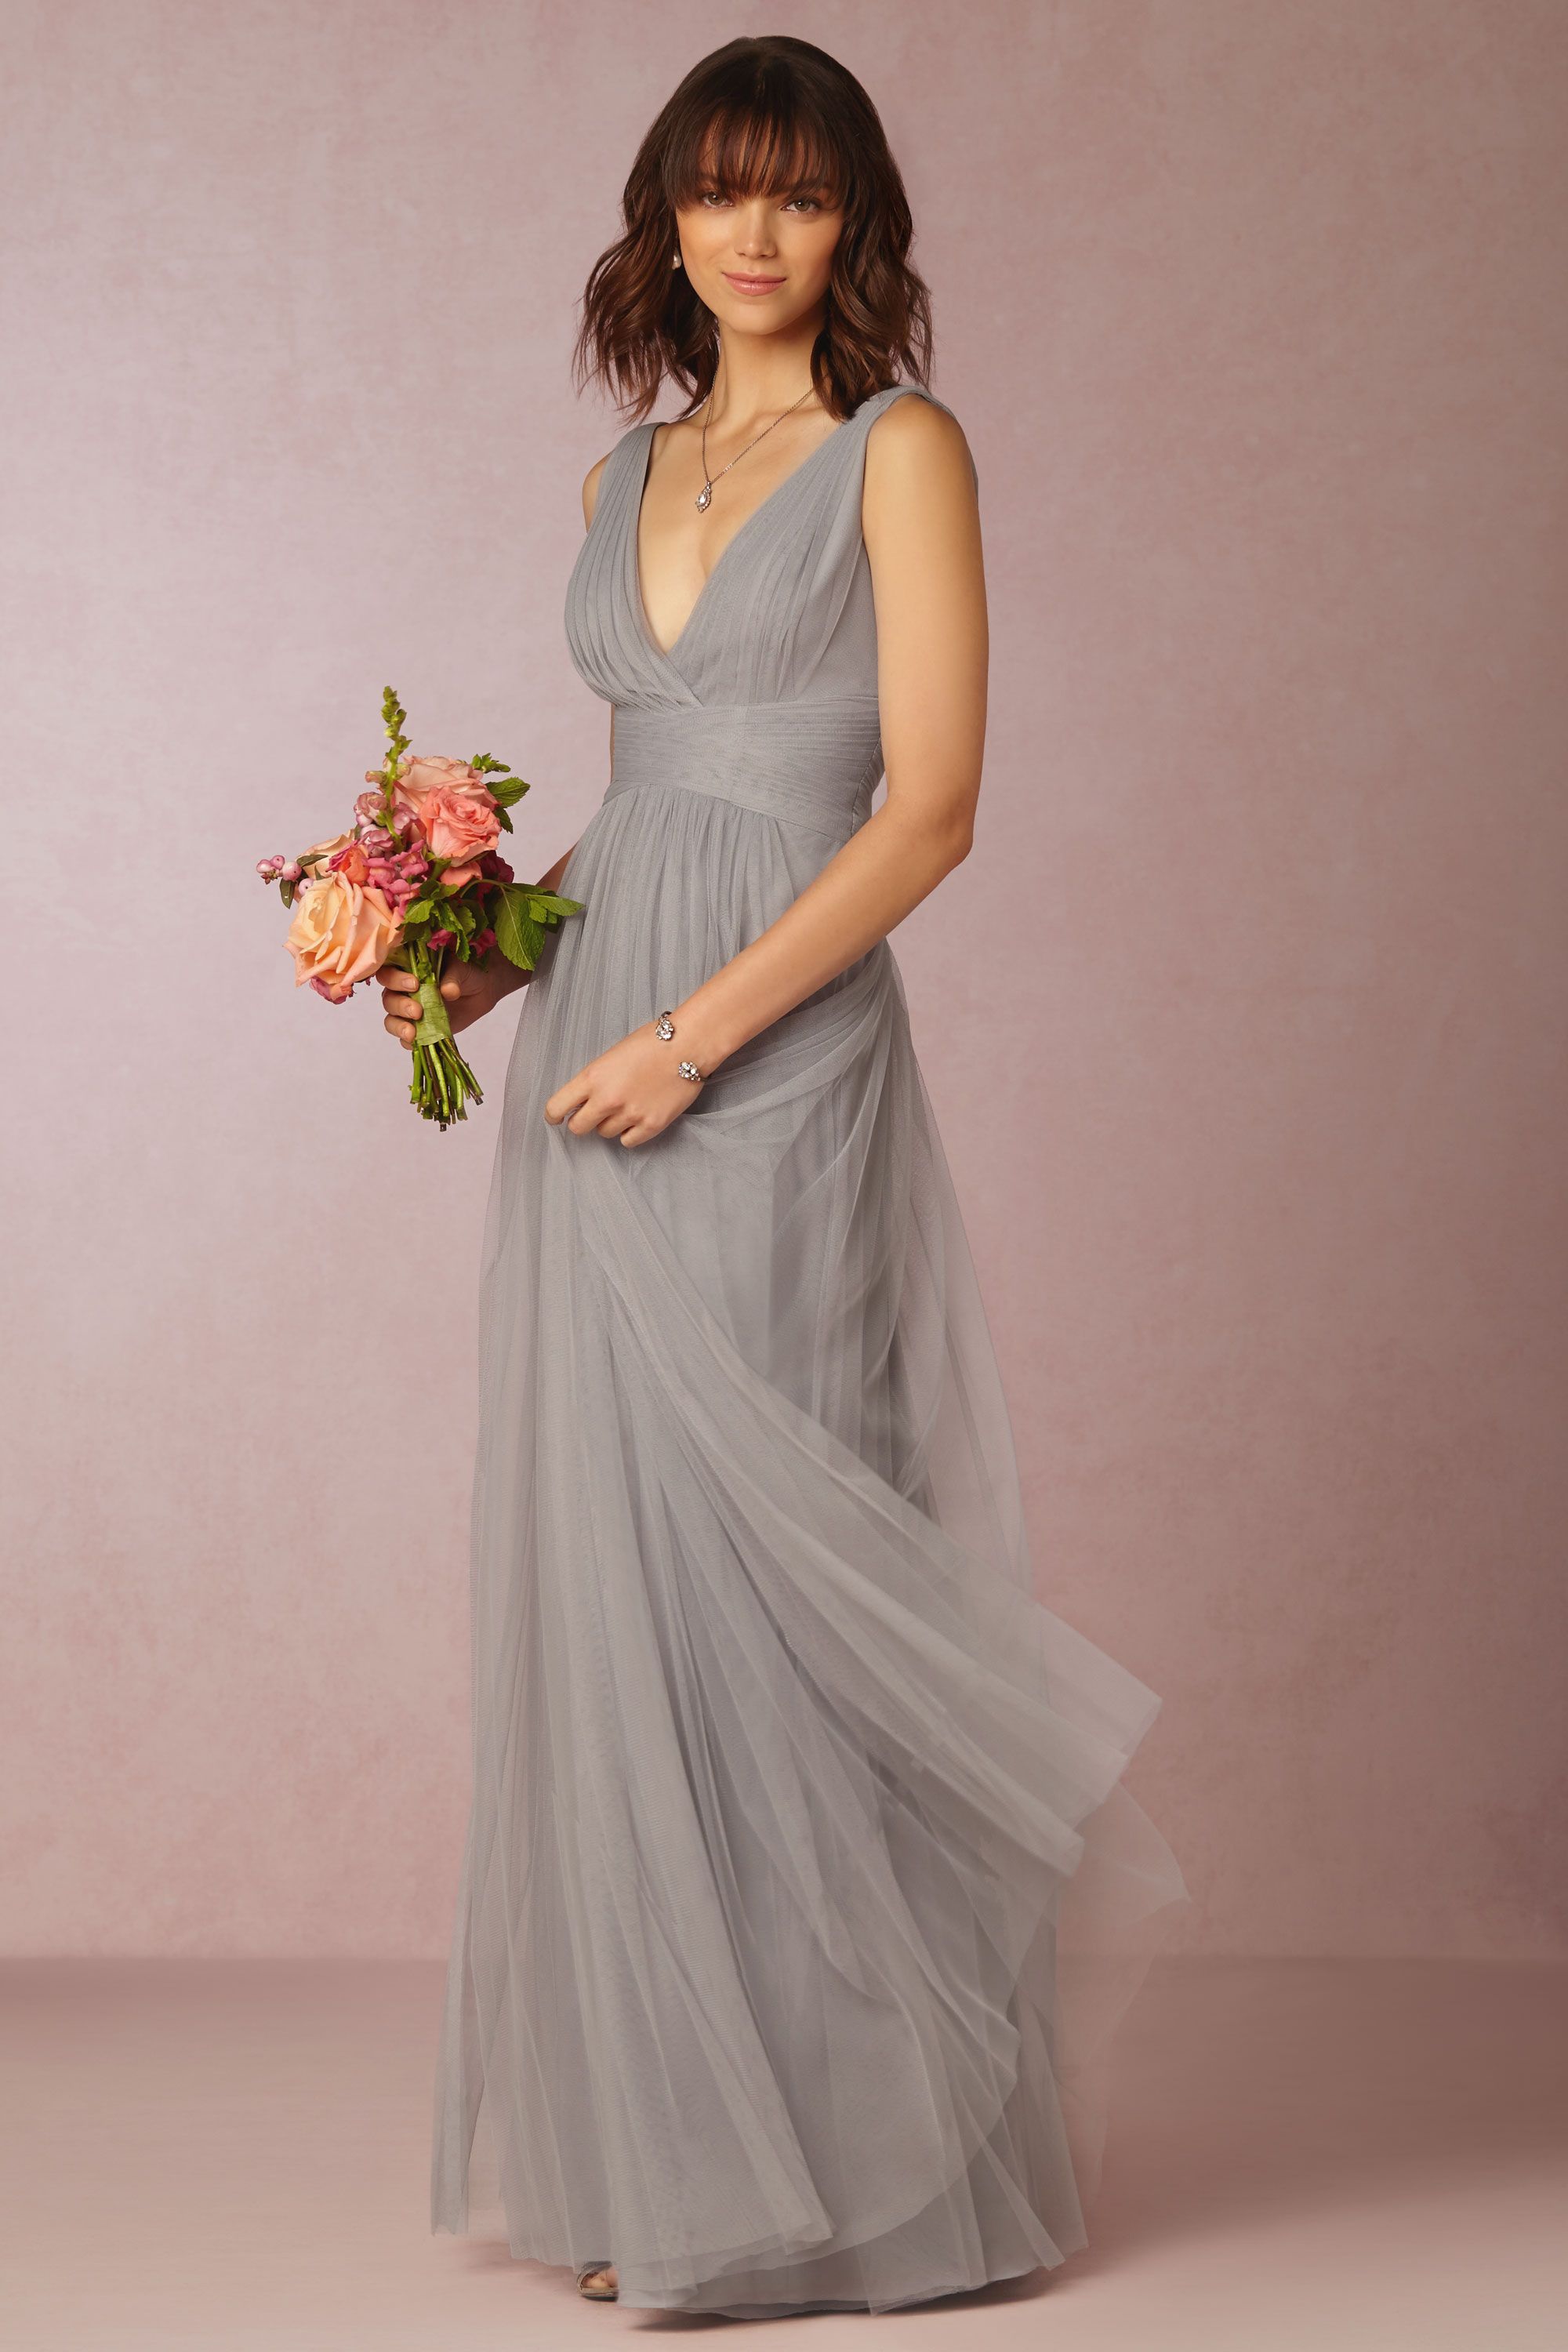 Colombe Dress in Sale Dresses | BHLDN